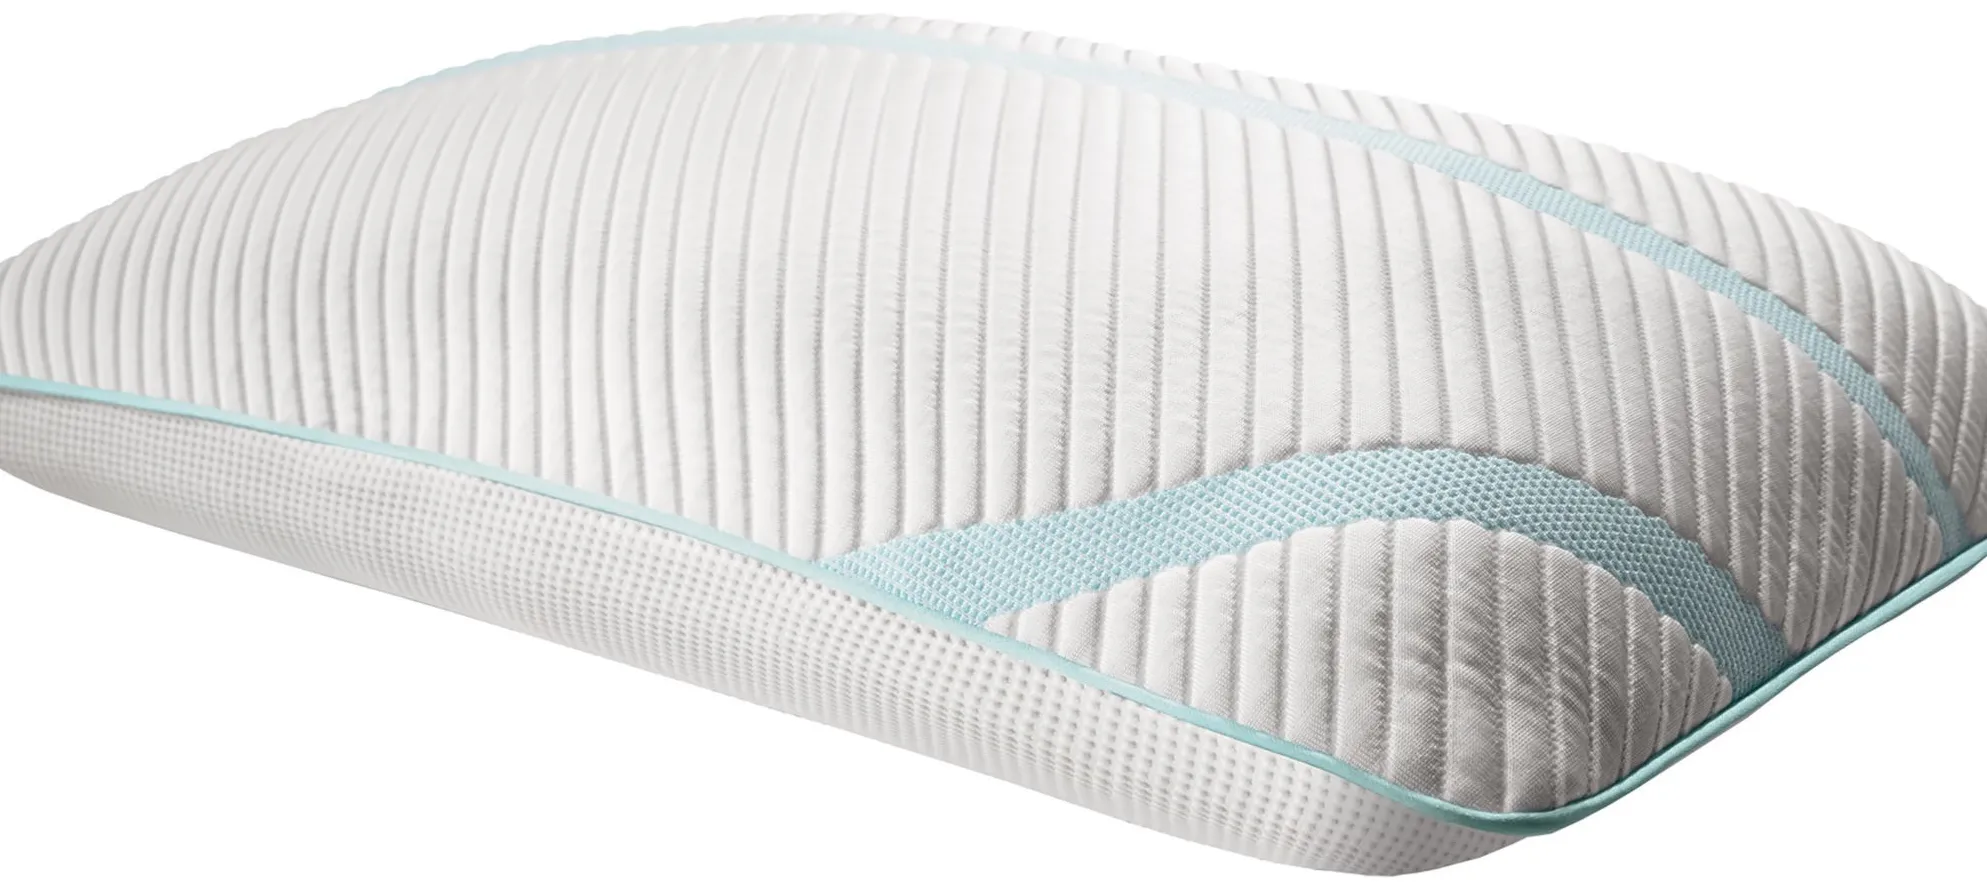 TEMPUR-Adapt ProLo + Cooling Pillow in White